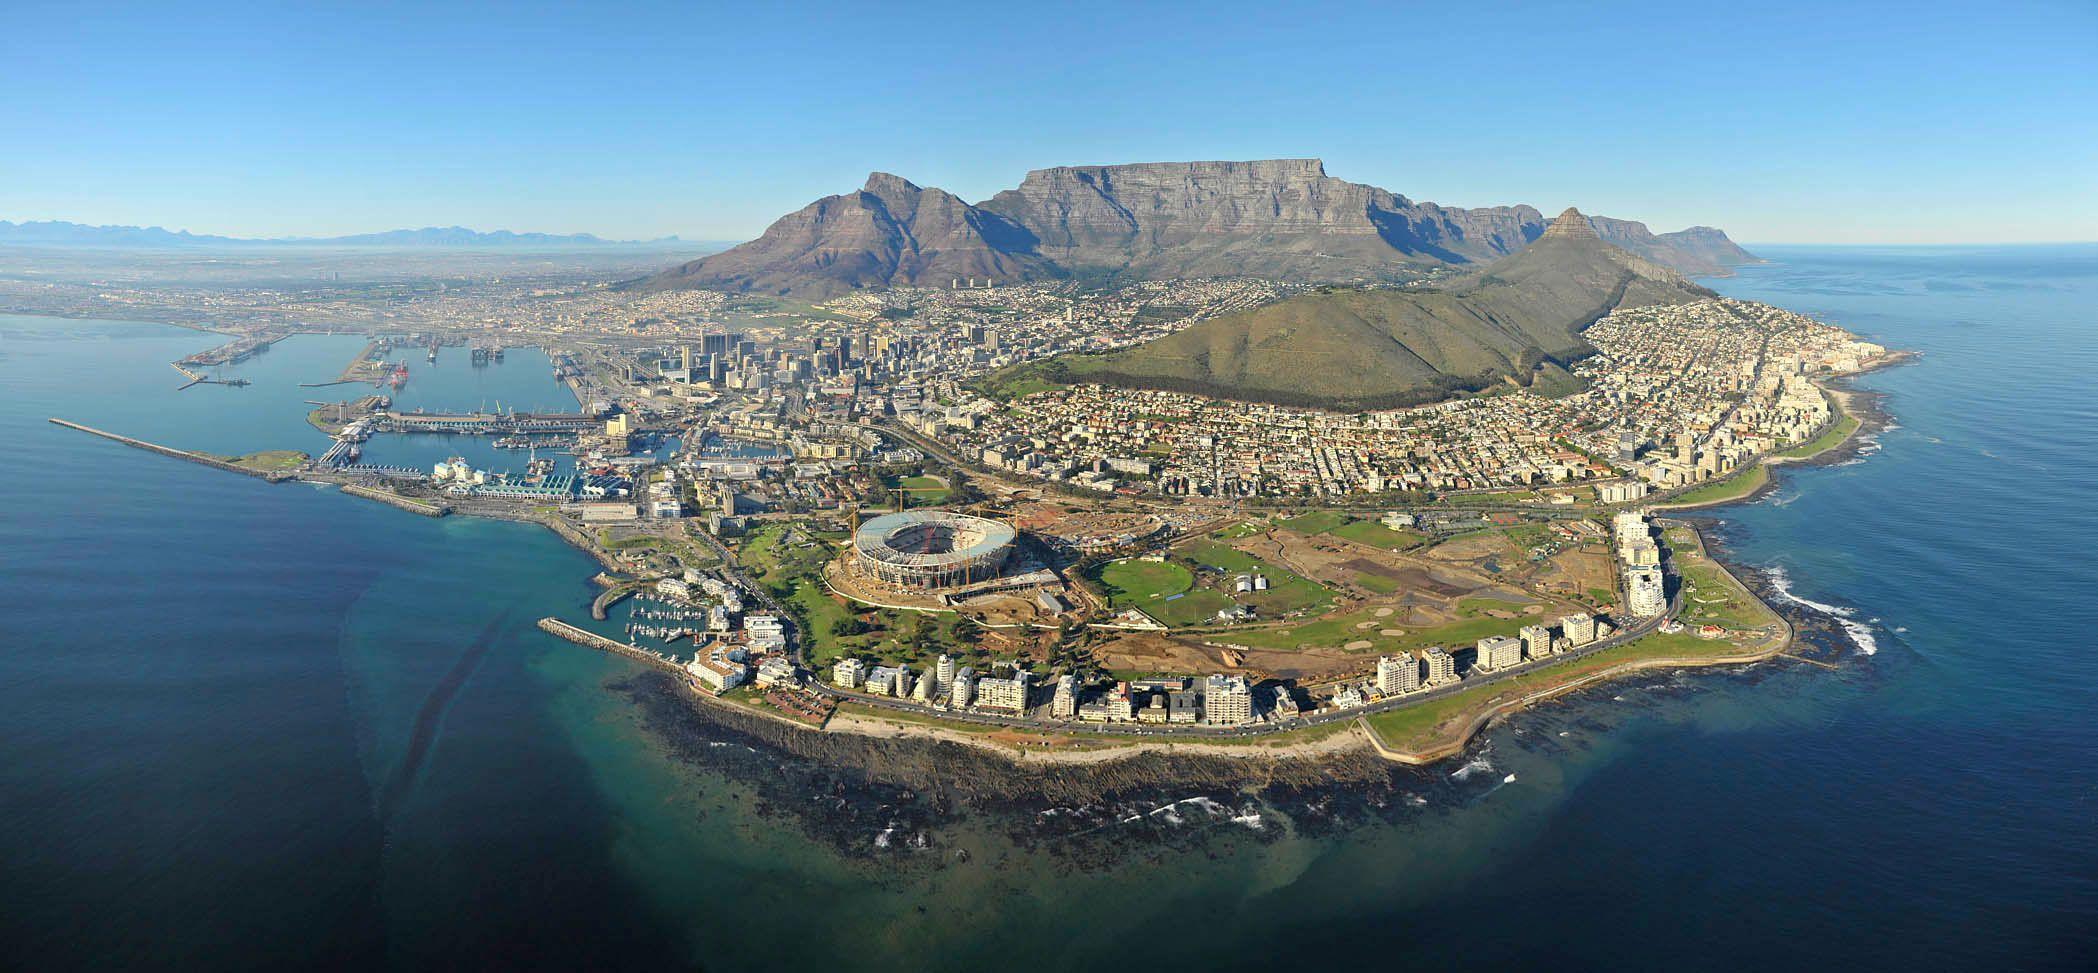 Cape Town South Africa HD Wallpaper. Download cool HD wallpaper